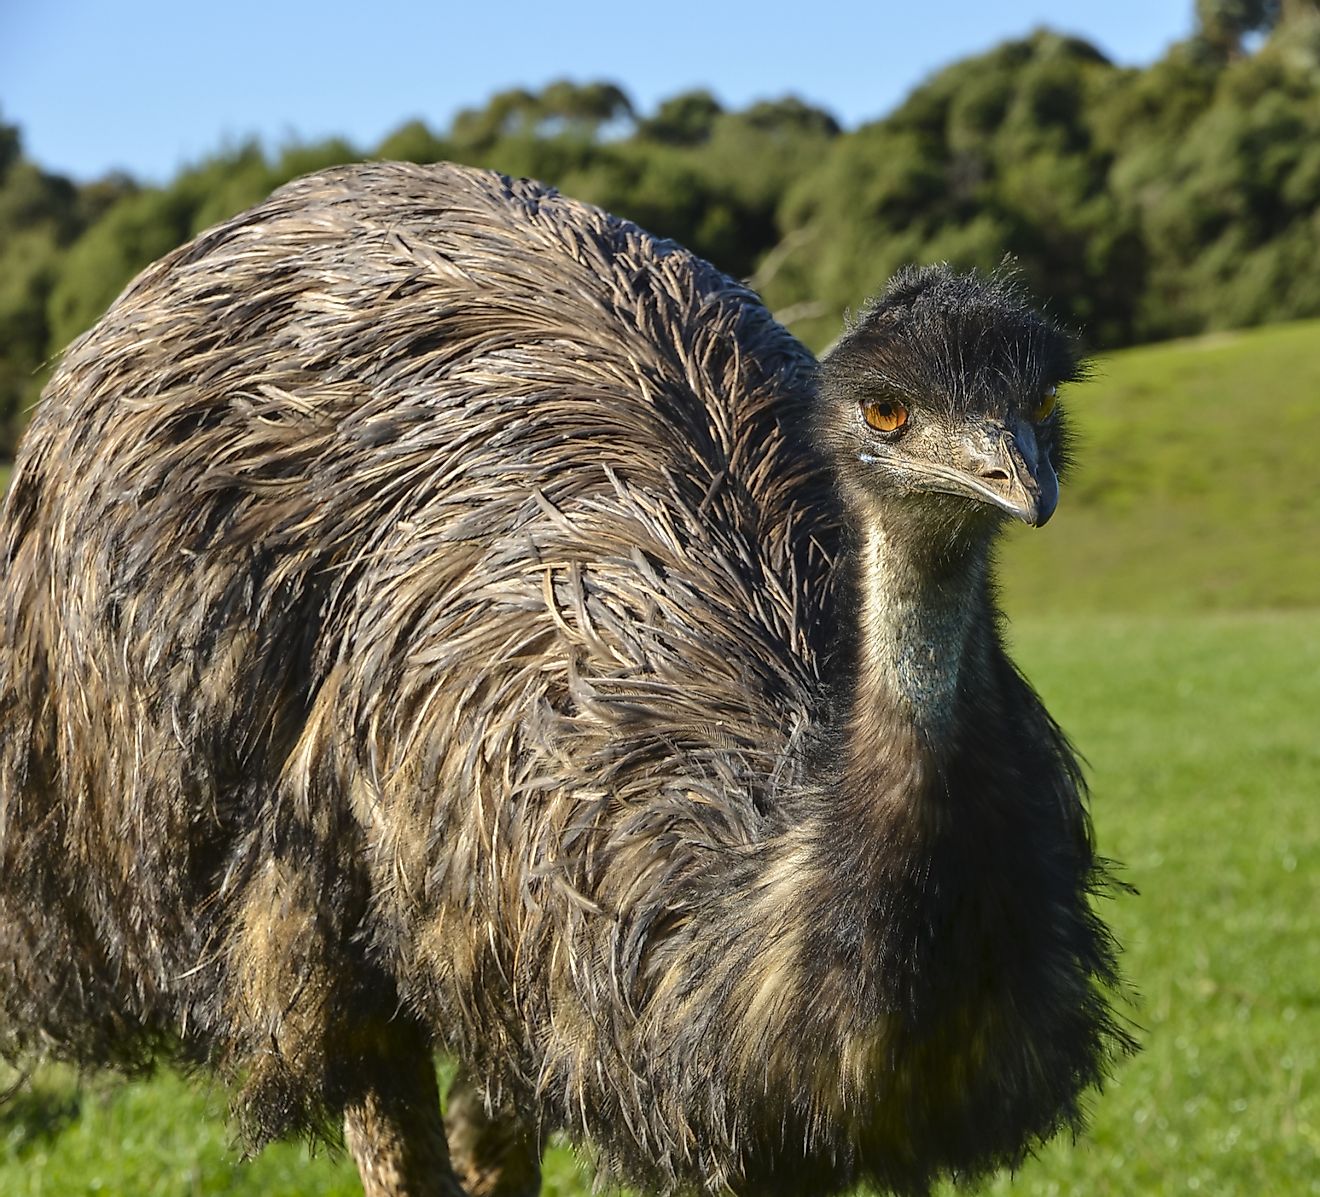 Flightless birds, Emus are most notable for their shaggy feathers, ionic eyes, and remarkable running speeds.